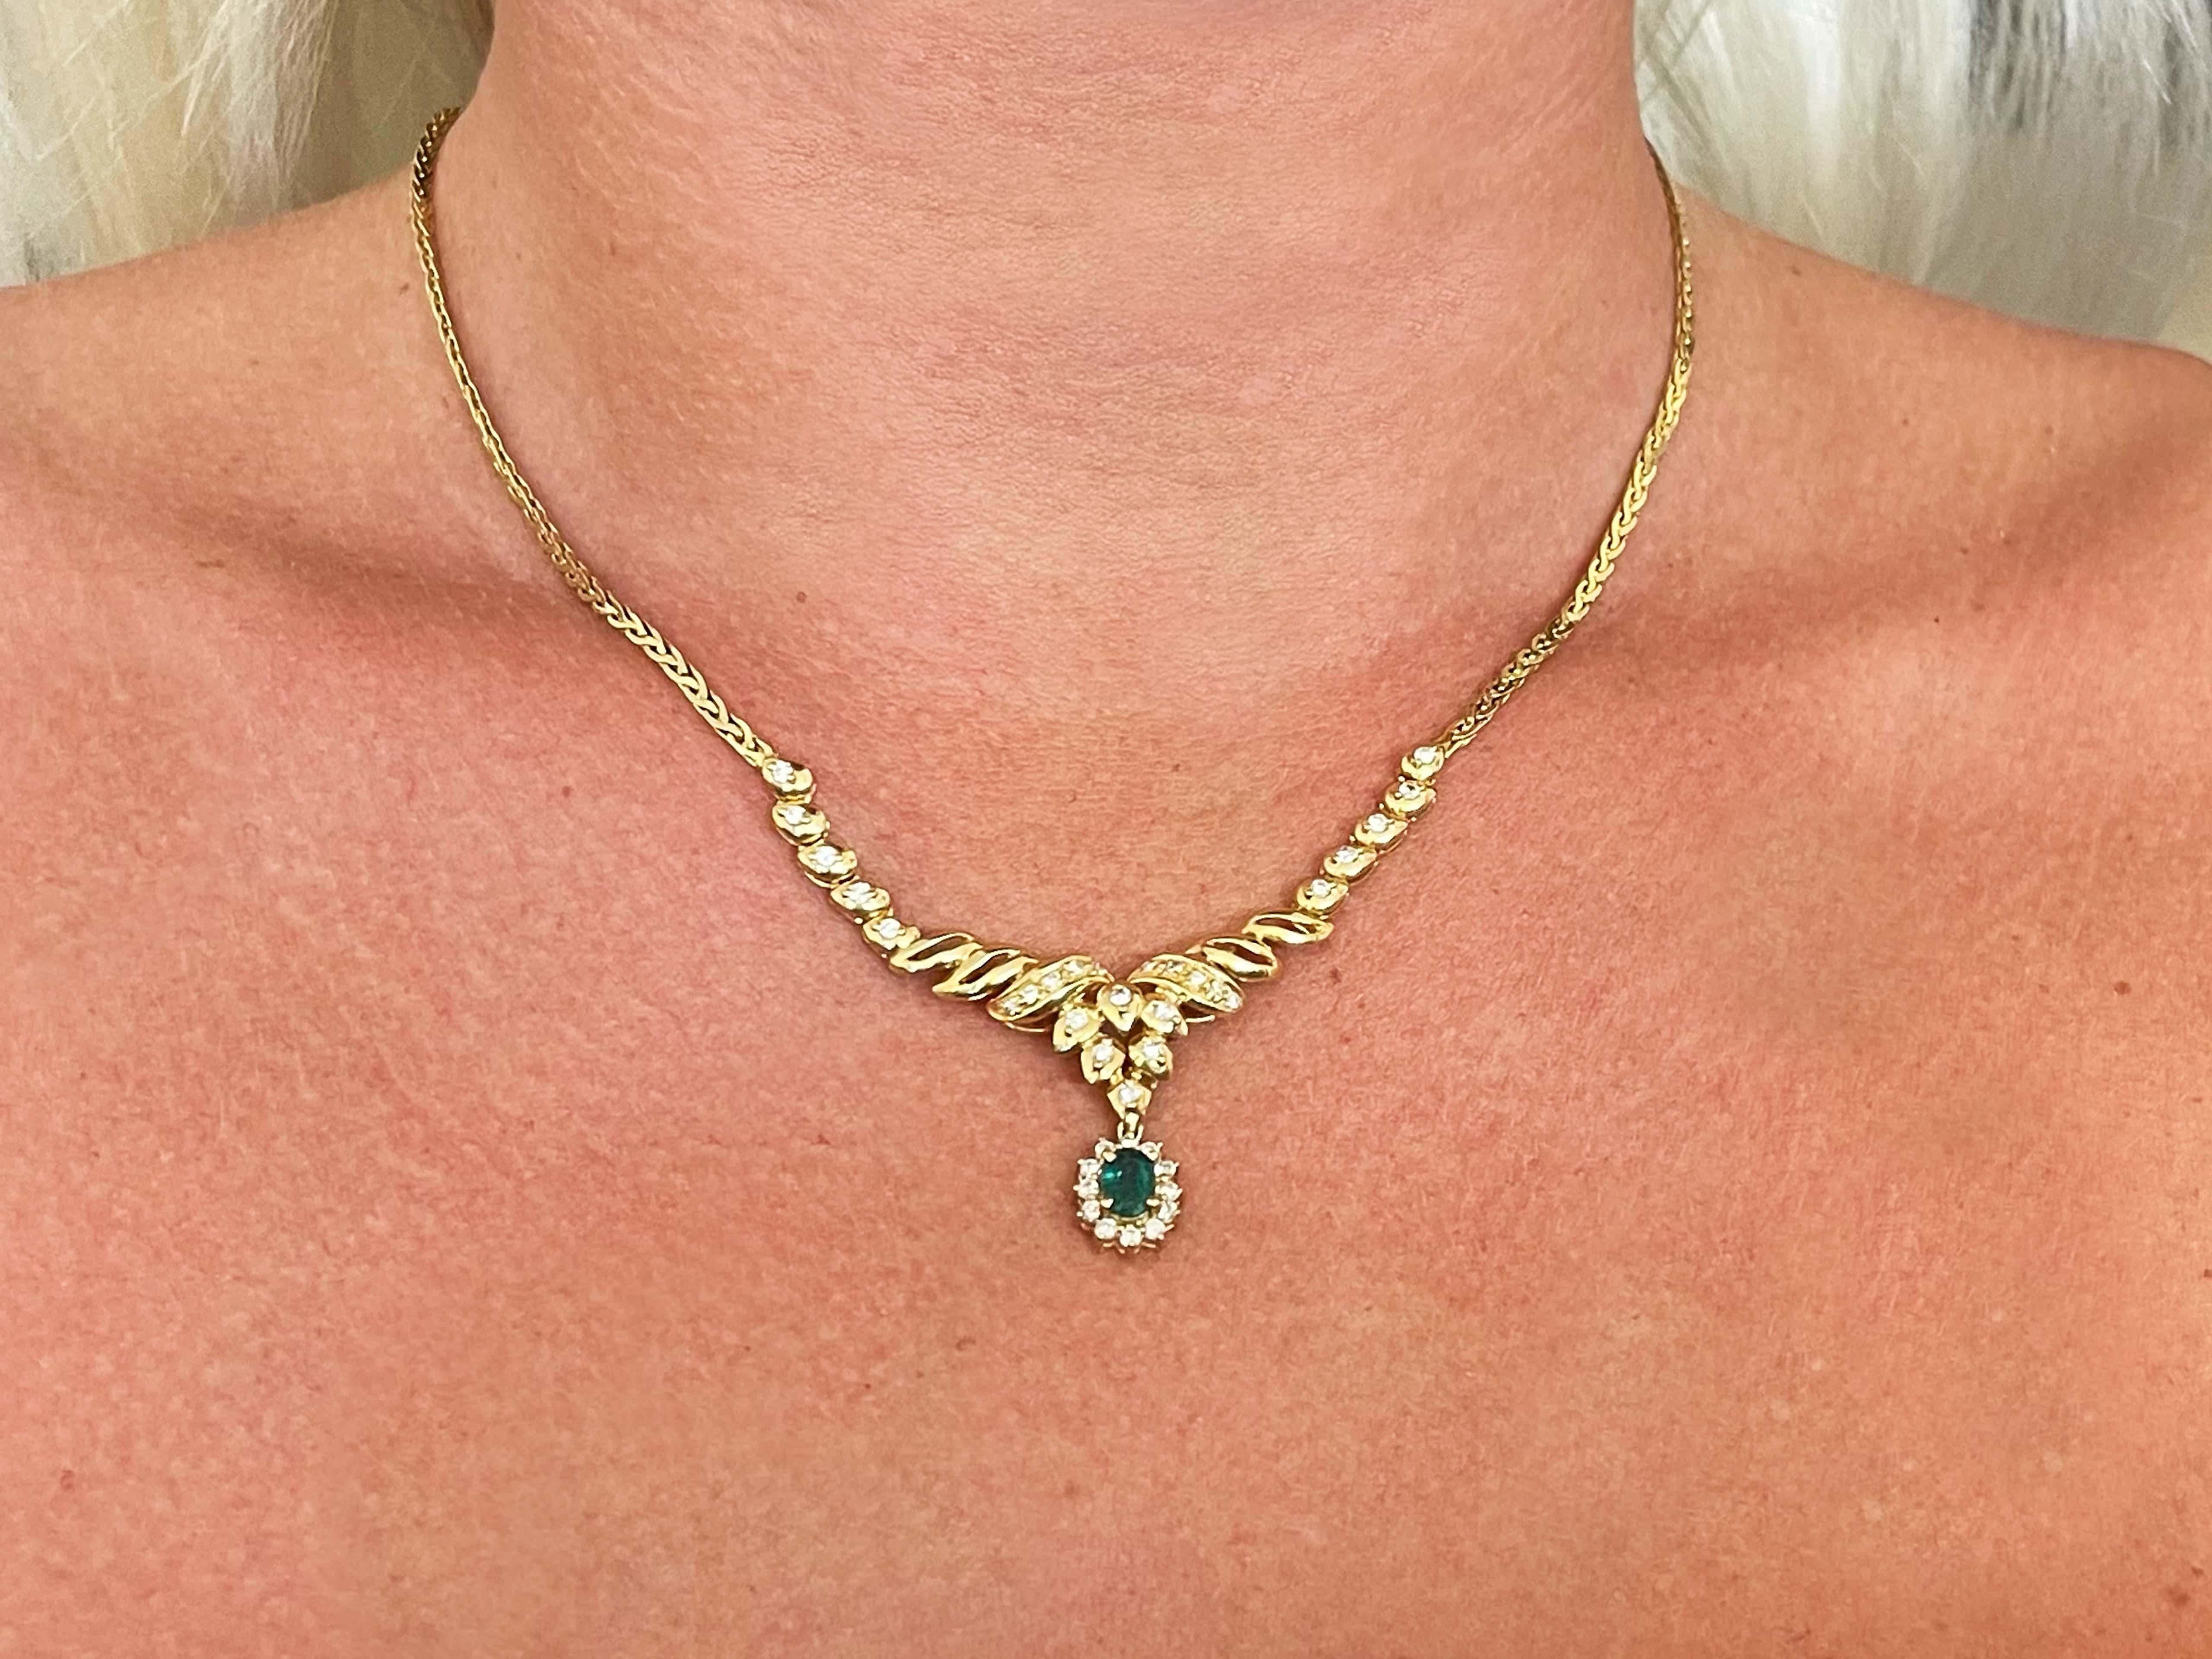 Necklace Specifications:

Metal: 18K Yellow Gold
​
​Gram Weight: 14.1 grams

Chain Length: 16.5